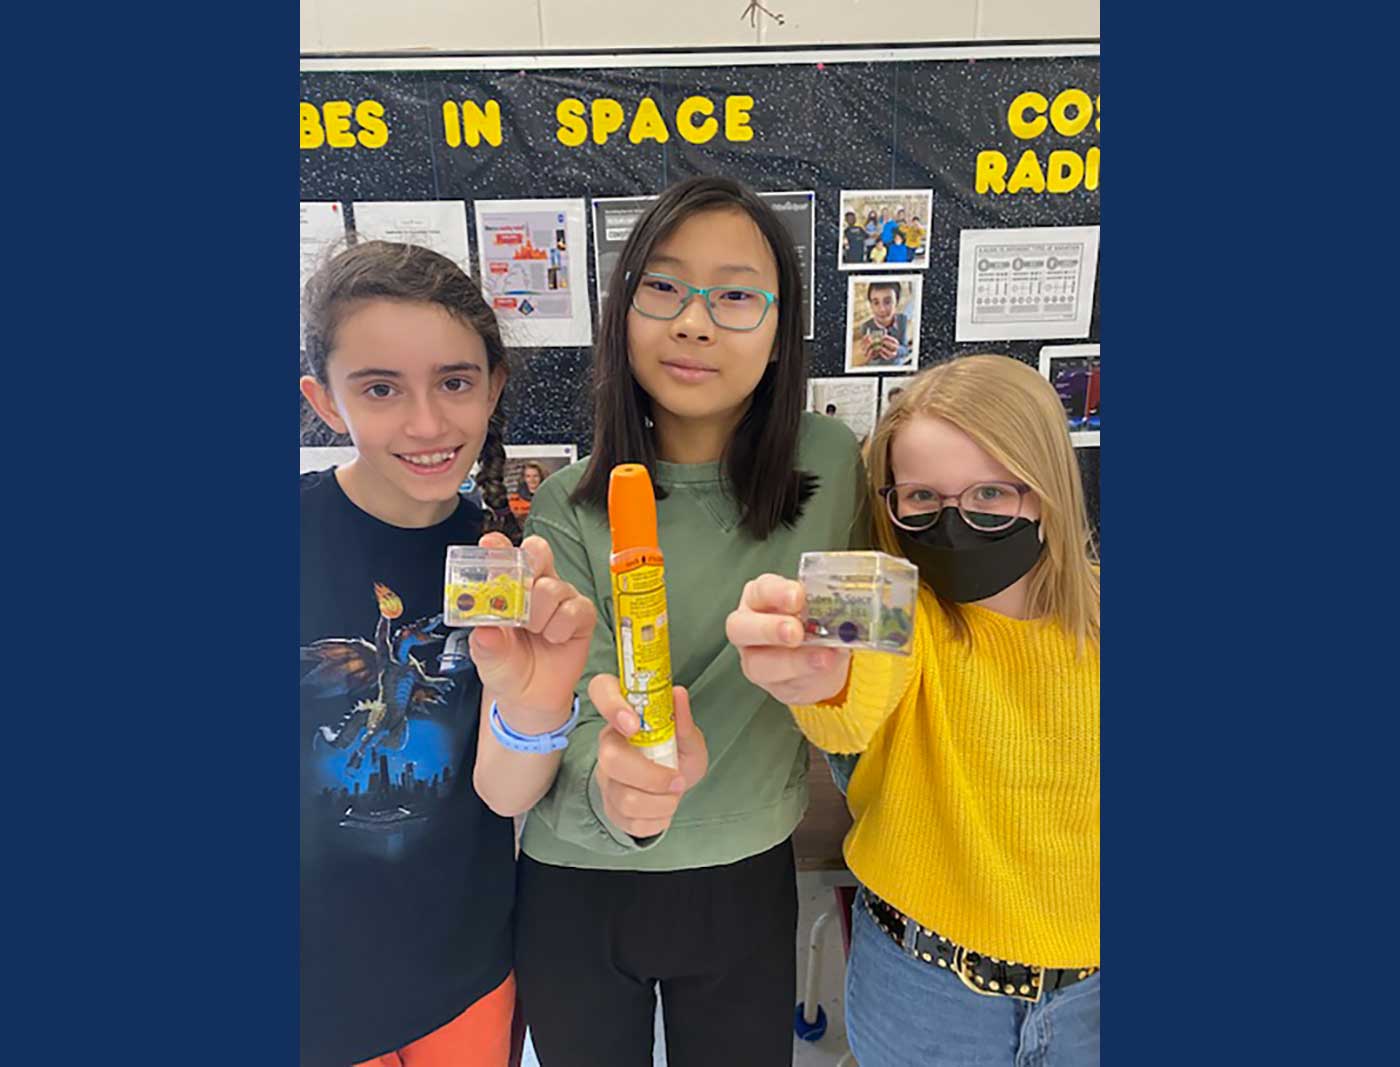 Three young people pose together, with two holding clear plastic cubes and the other holding an EpiPen.